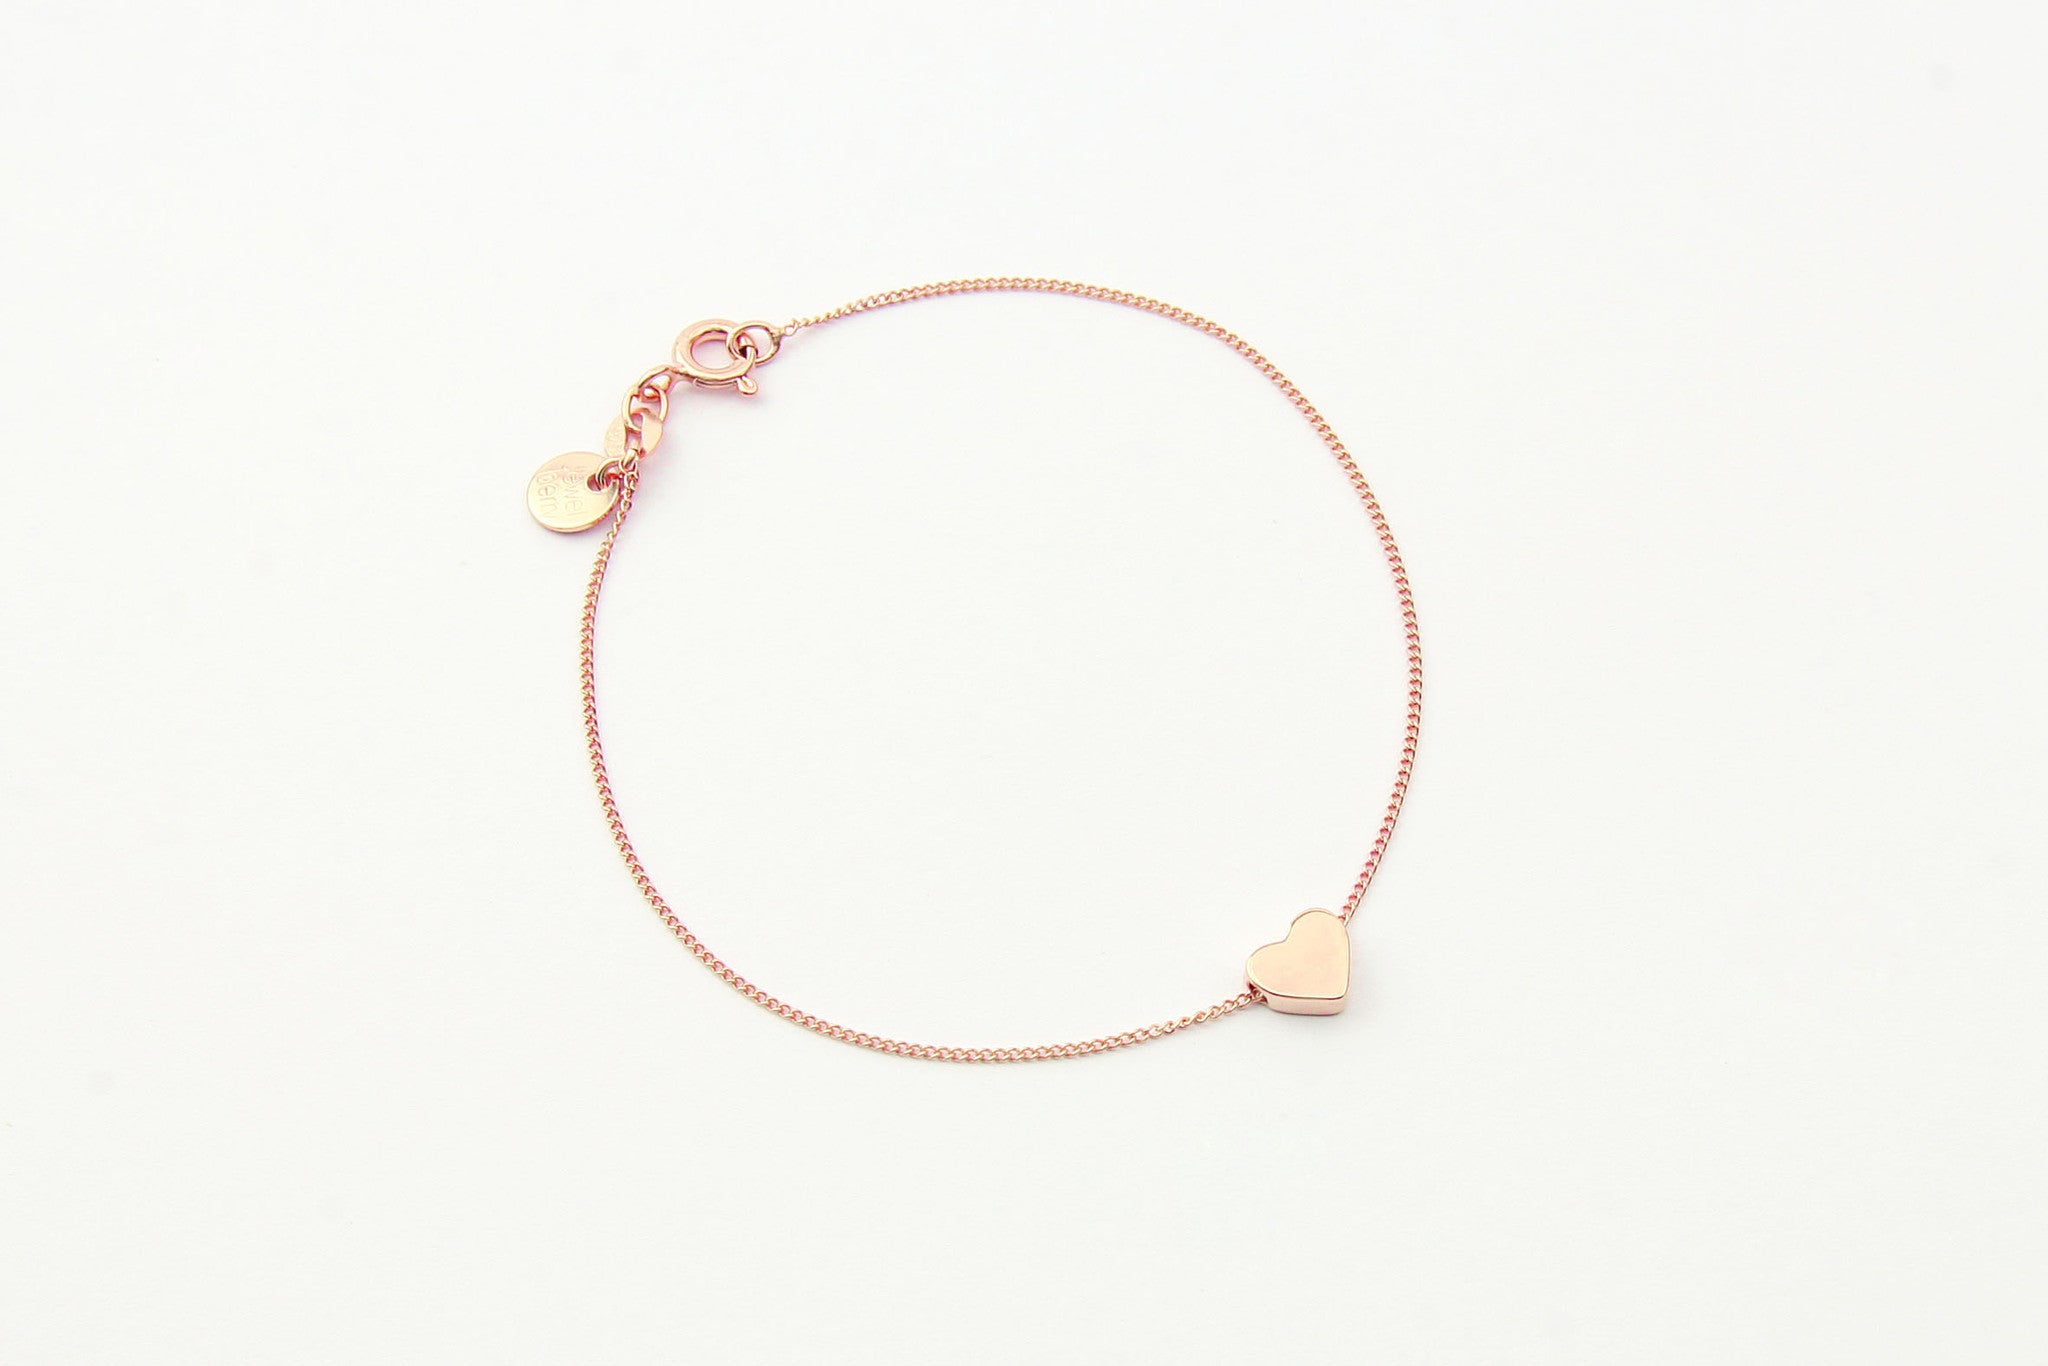 jewelberry armband bracelet little heart rose gold plated sterling silver fine jewelry handmade with love fairtrade curb chain